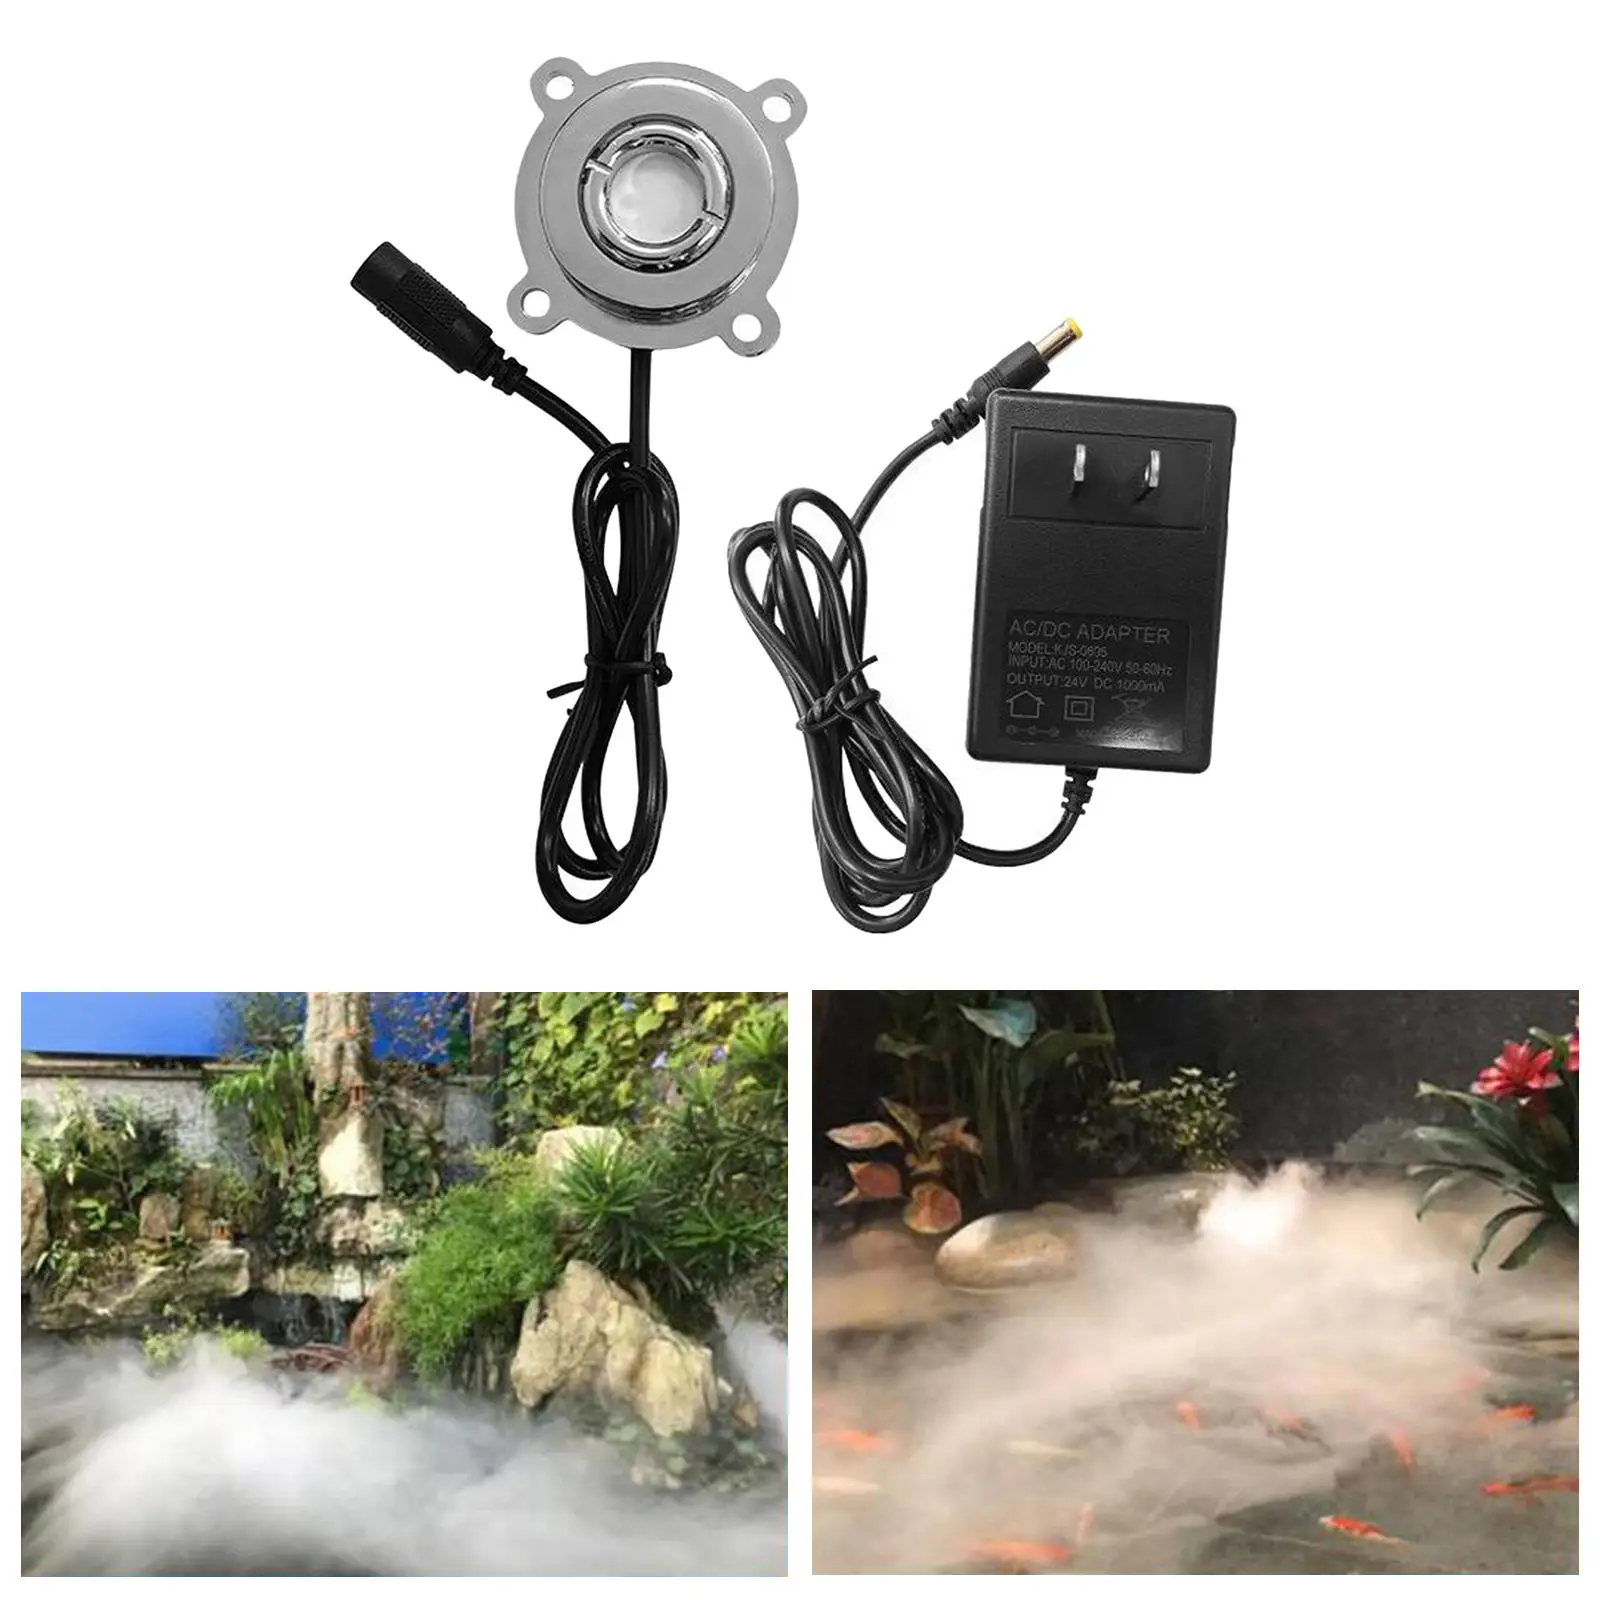 36V Mist Maker Fogger Ultrasonic Mister Fog Machine for Rockery Fish Tank Atomizer Air Humidifier Water Feature Office